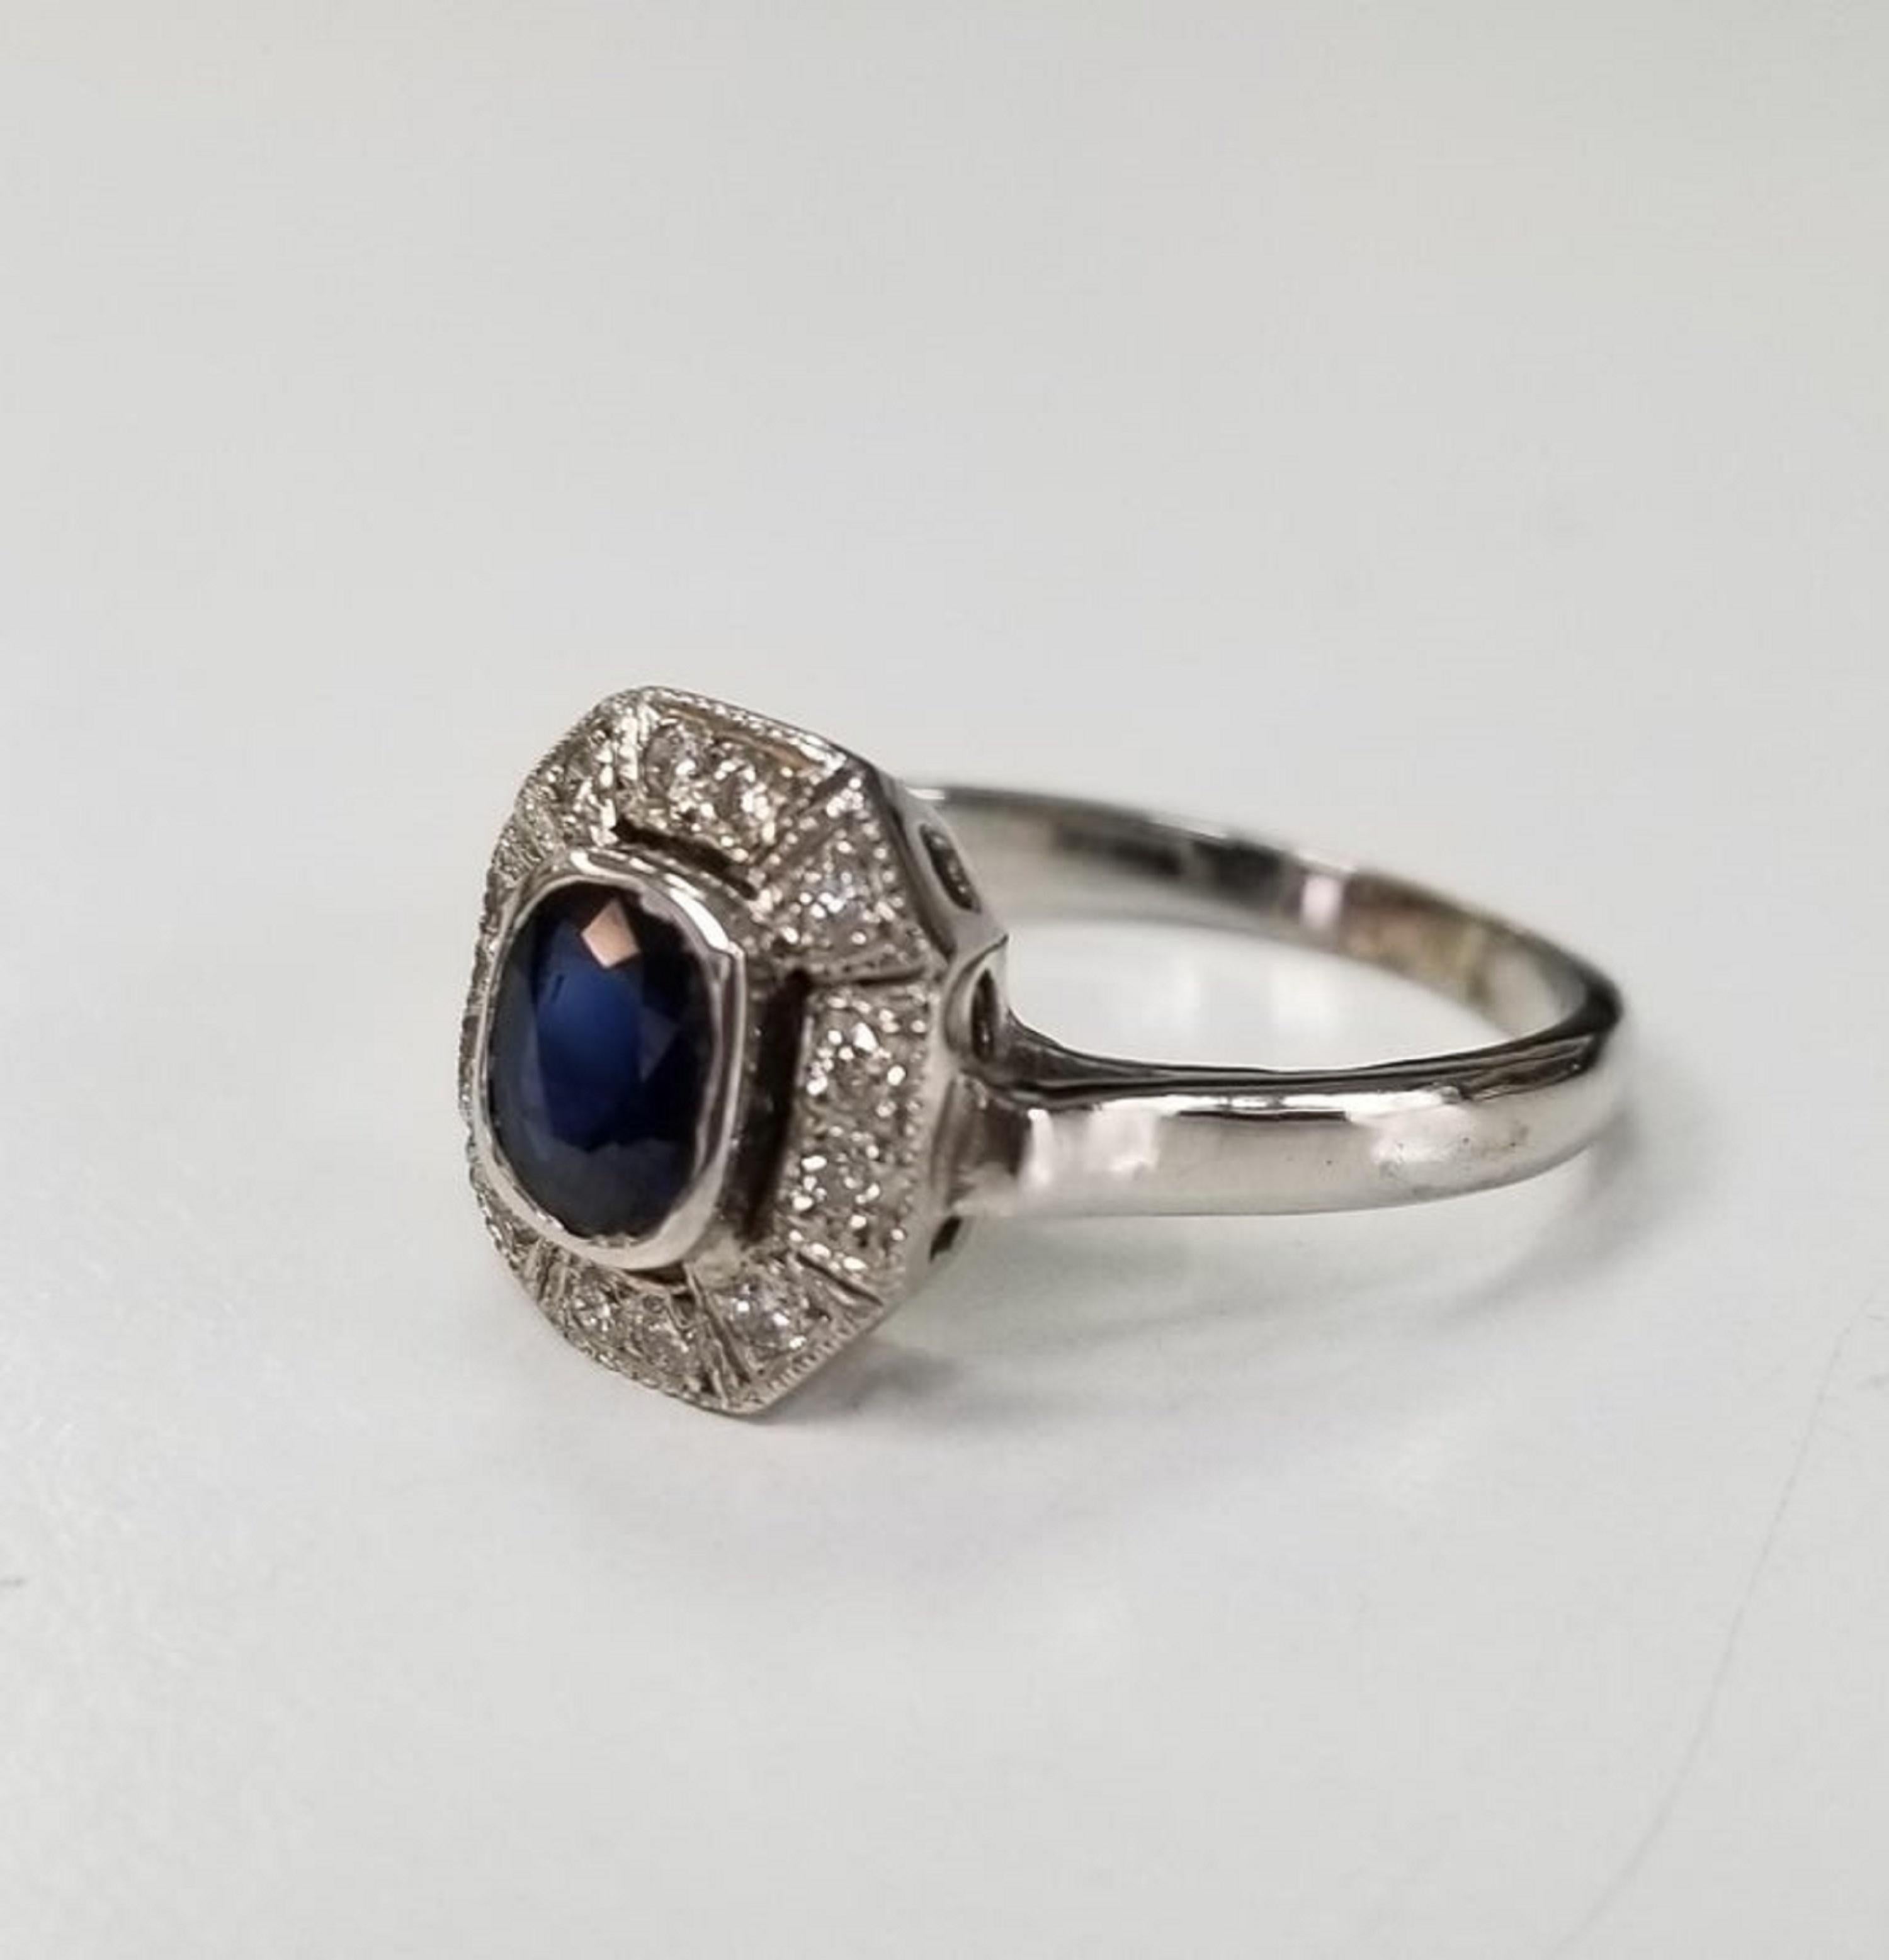 14k white gold Sapphire and diamond  ring, containing 1 oval sapphire weighing .75pts. and 12 round full cut diamonds of very fine quality weighing .15pts.  This ring is a size 6 but we will size to fit for free.